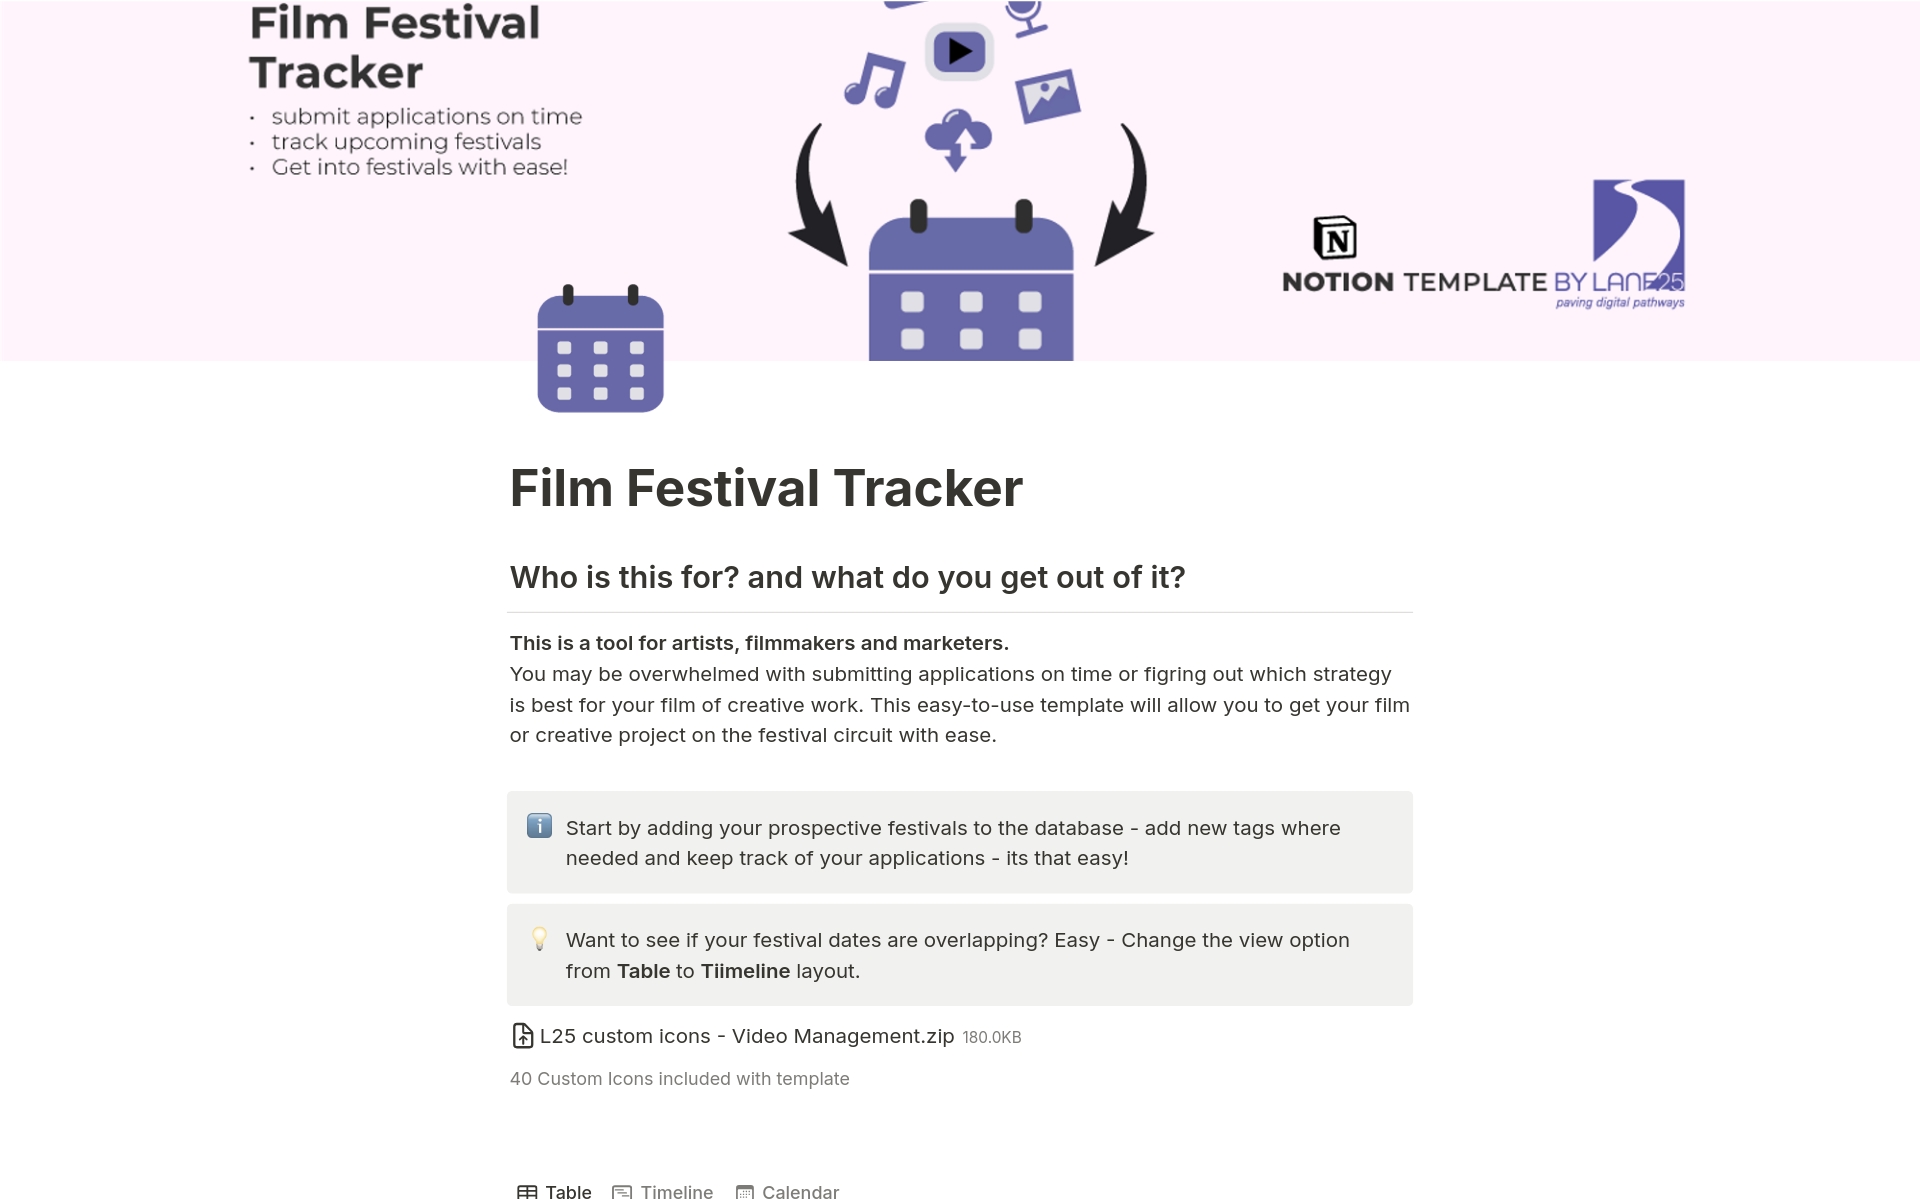 You may be overwhelmed with submitting applications on time or figring out which strategy is best for your film of creative work. This easy-to-use template will allow you to get your film or creative project on the festival circuit with ease. 